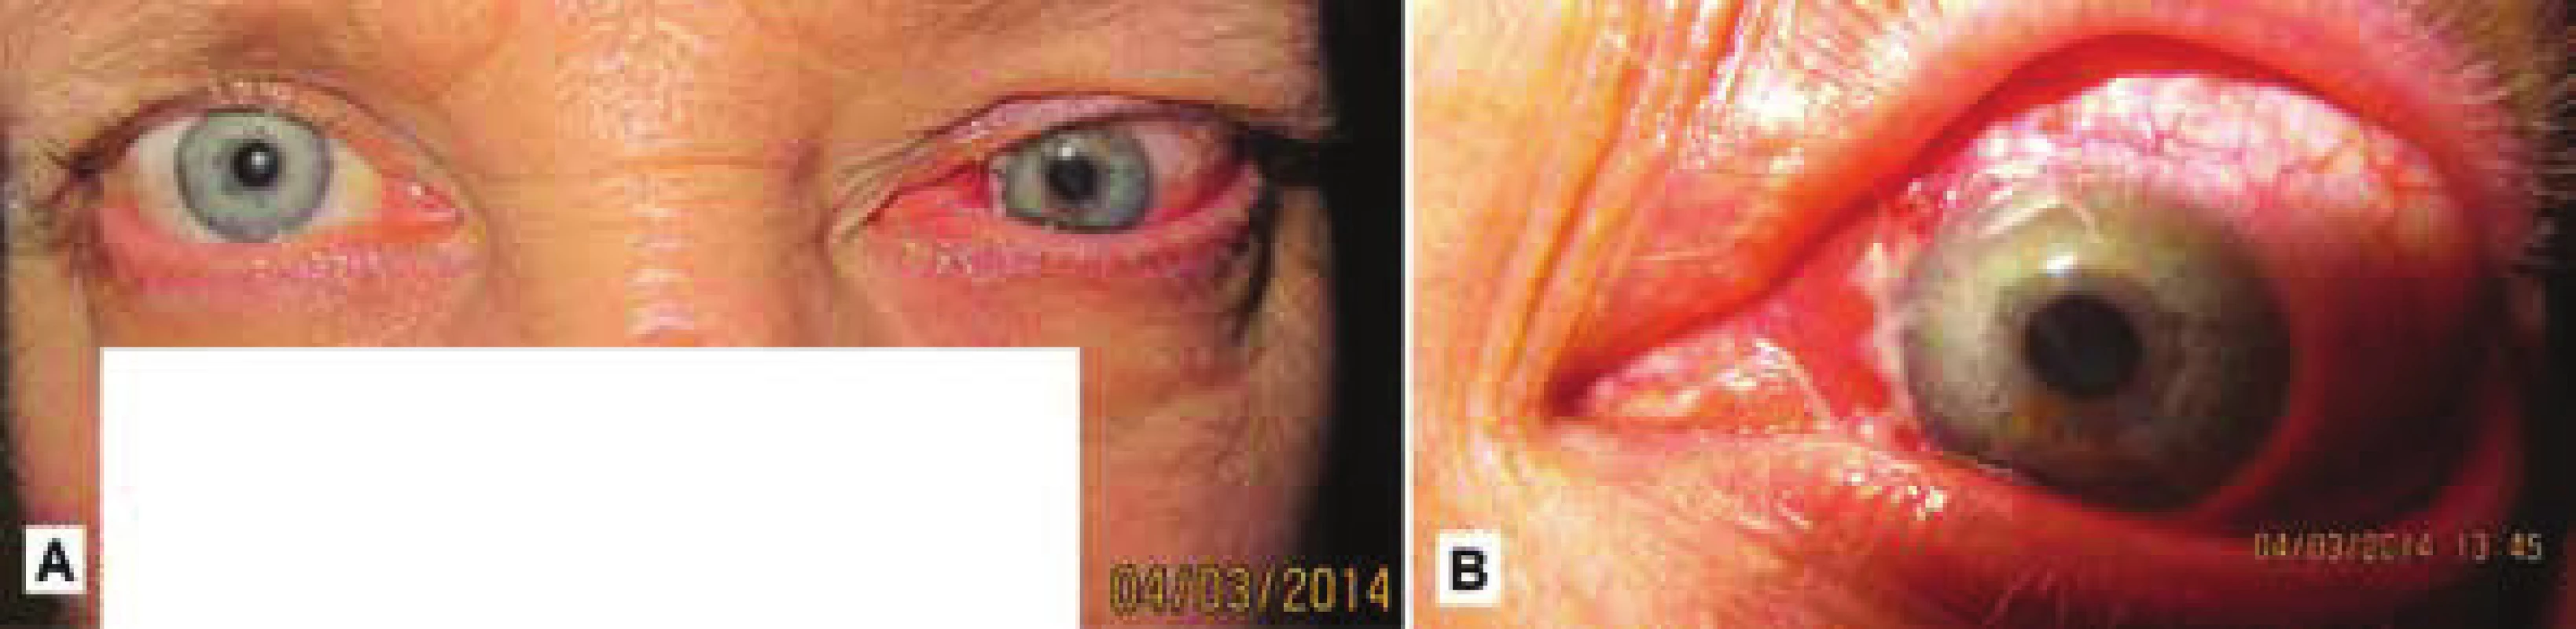 Clinical
picture of the
same patient in
March 2014 –
progression with
tendency of infiltration
into orbit